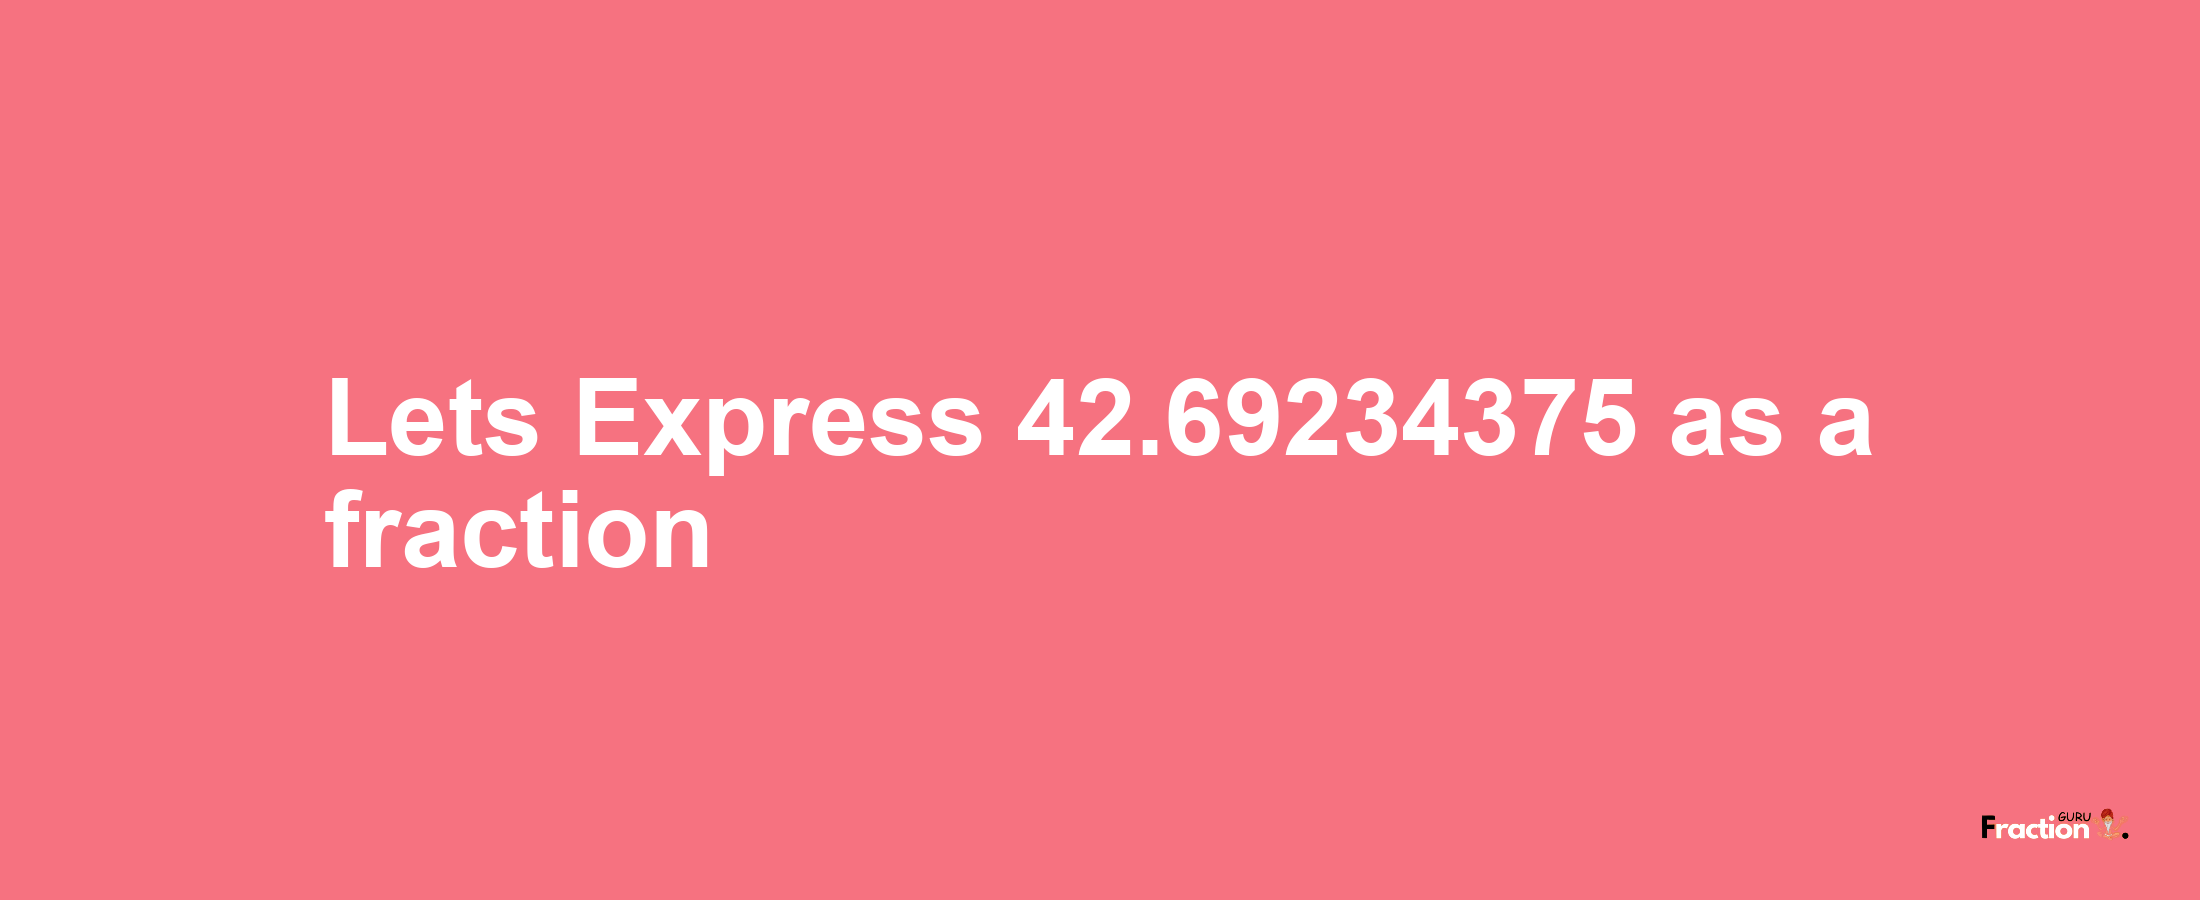 Lets Express 42.69234375 as afraction